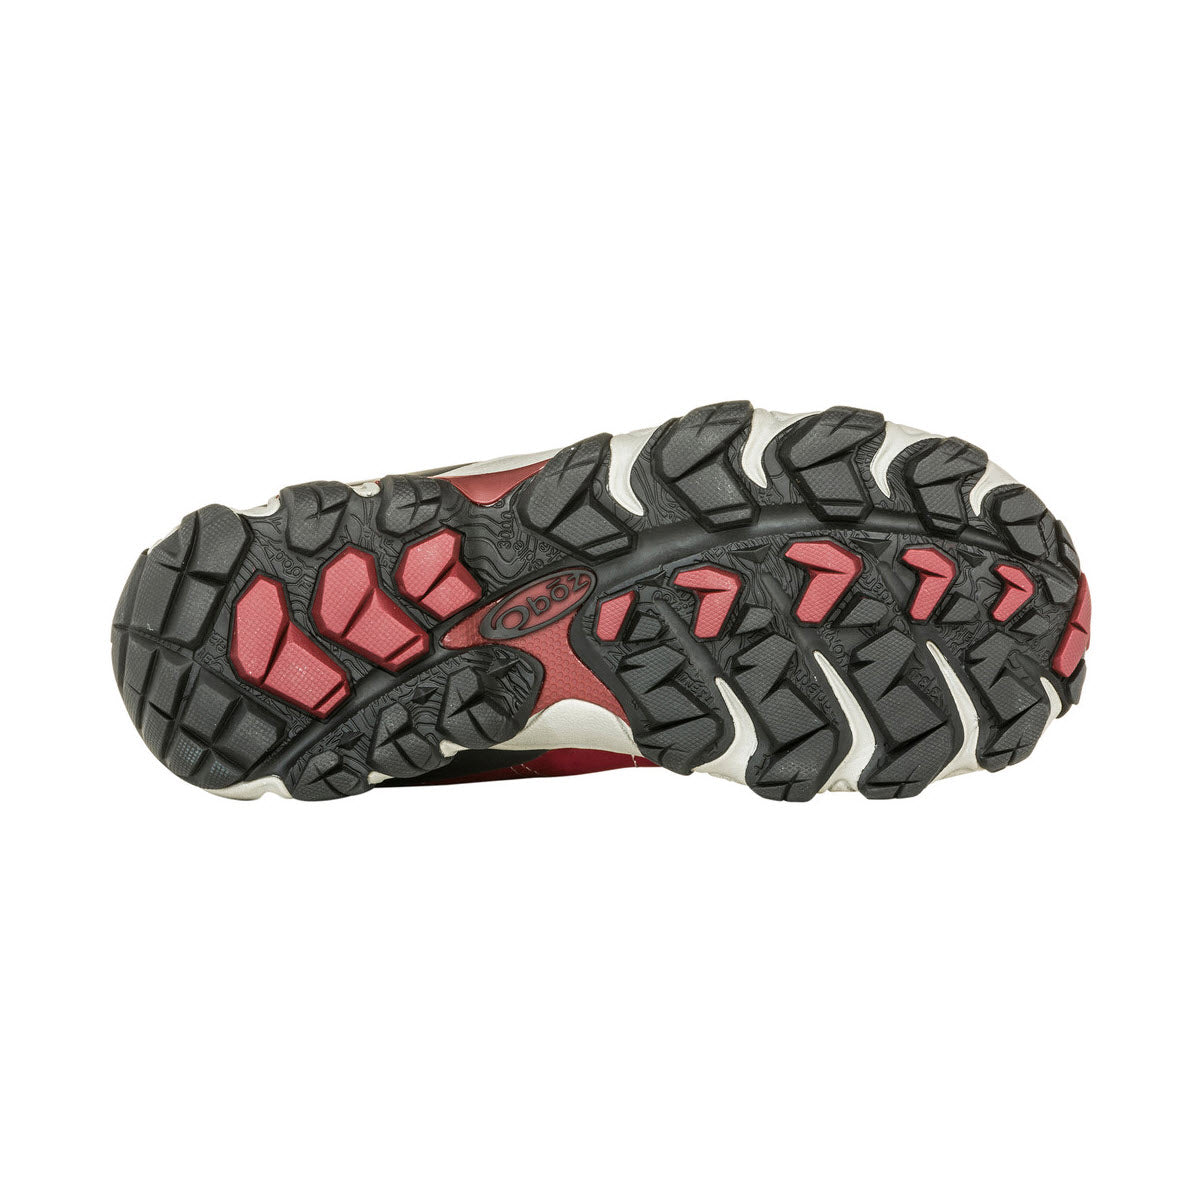 Sole of an OBOZ BRIDGER MID BDRY RIO RED - WOMENS hiking boot featuring a red, black, and grey tread pattern with visible Oboz logo and B-DRY waterproofing.